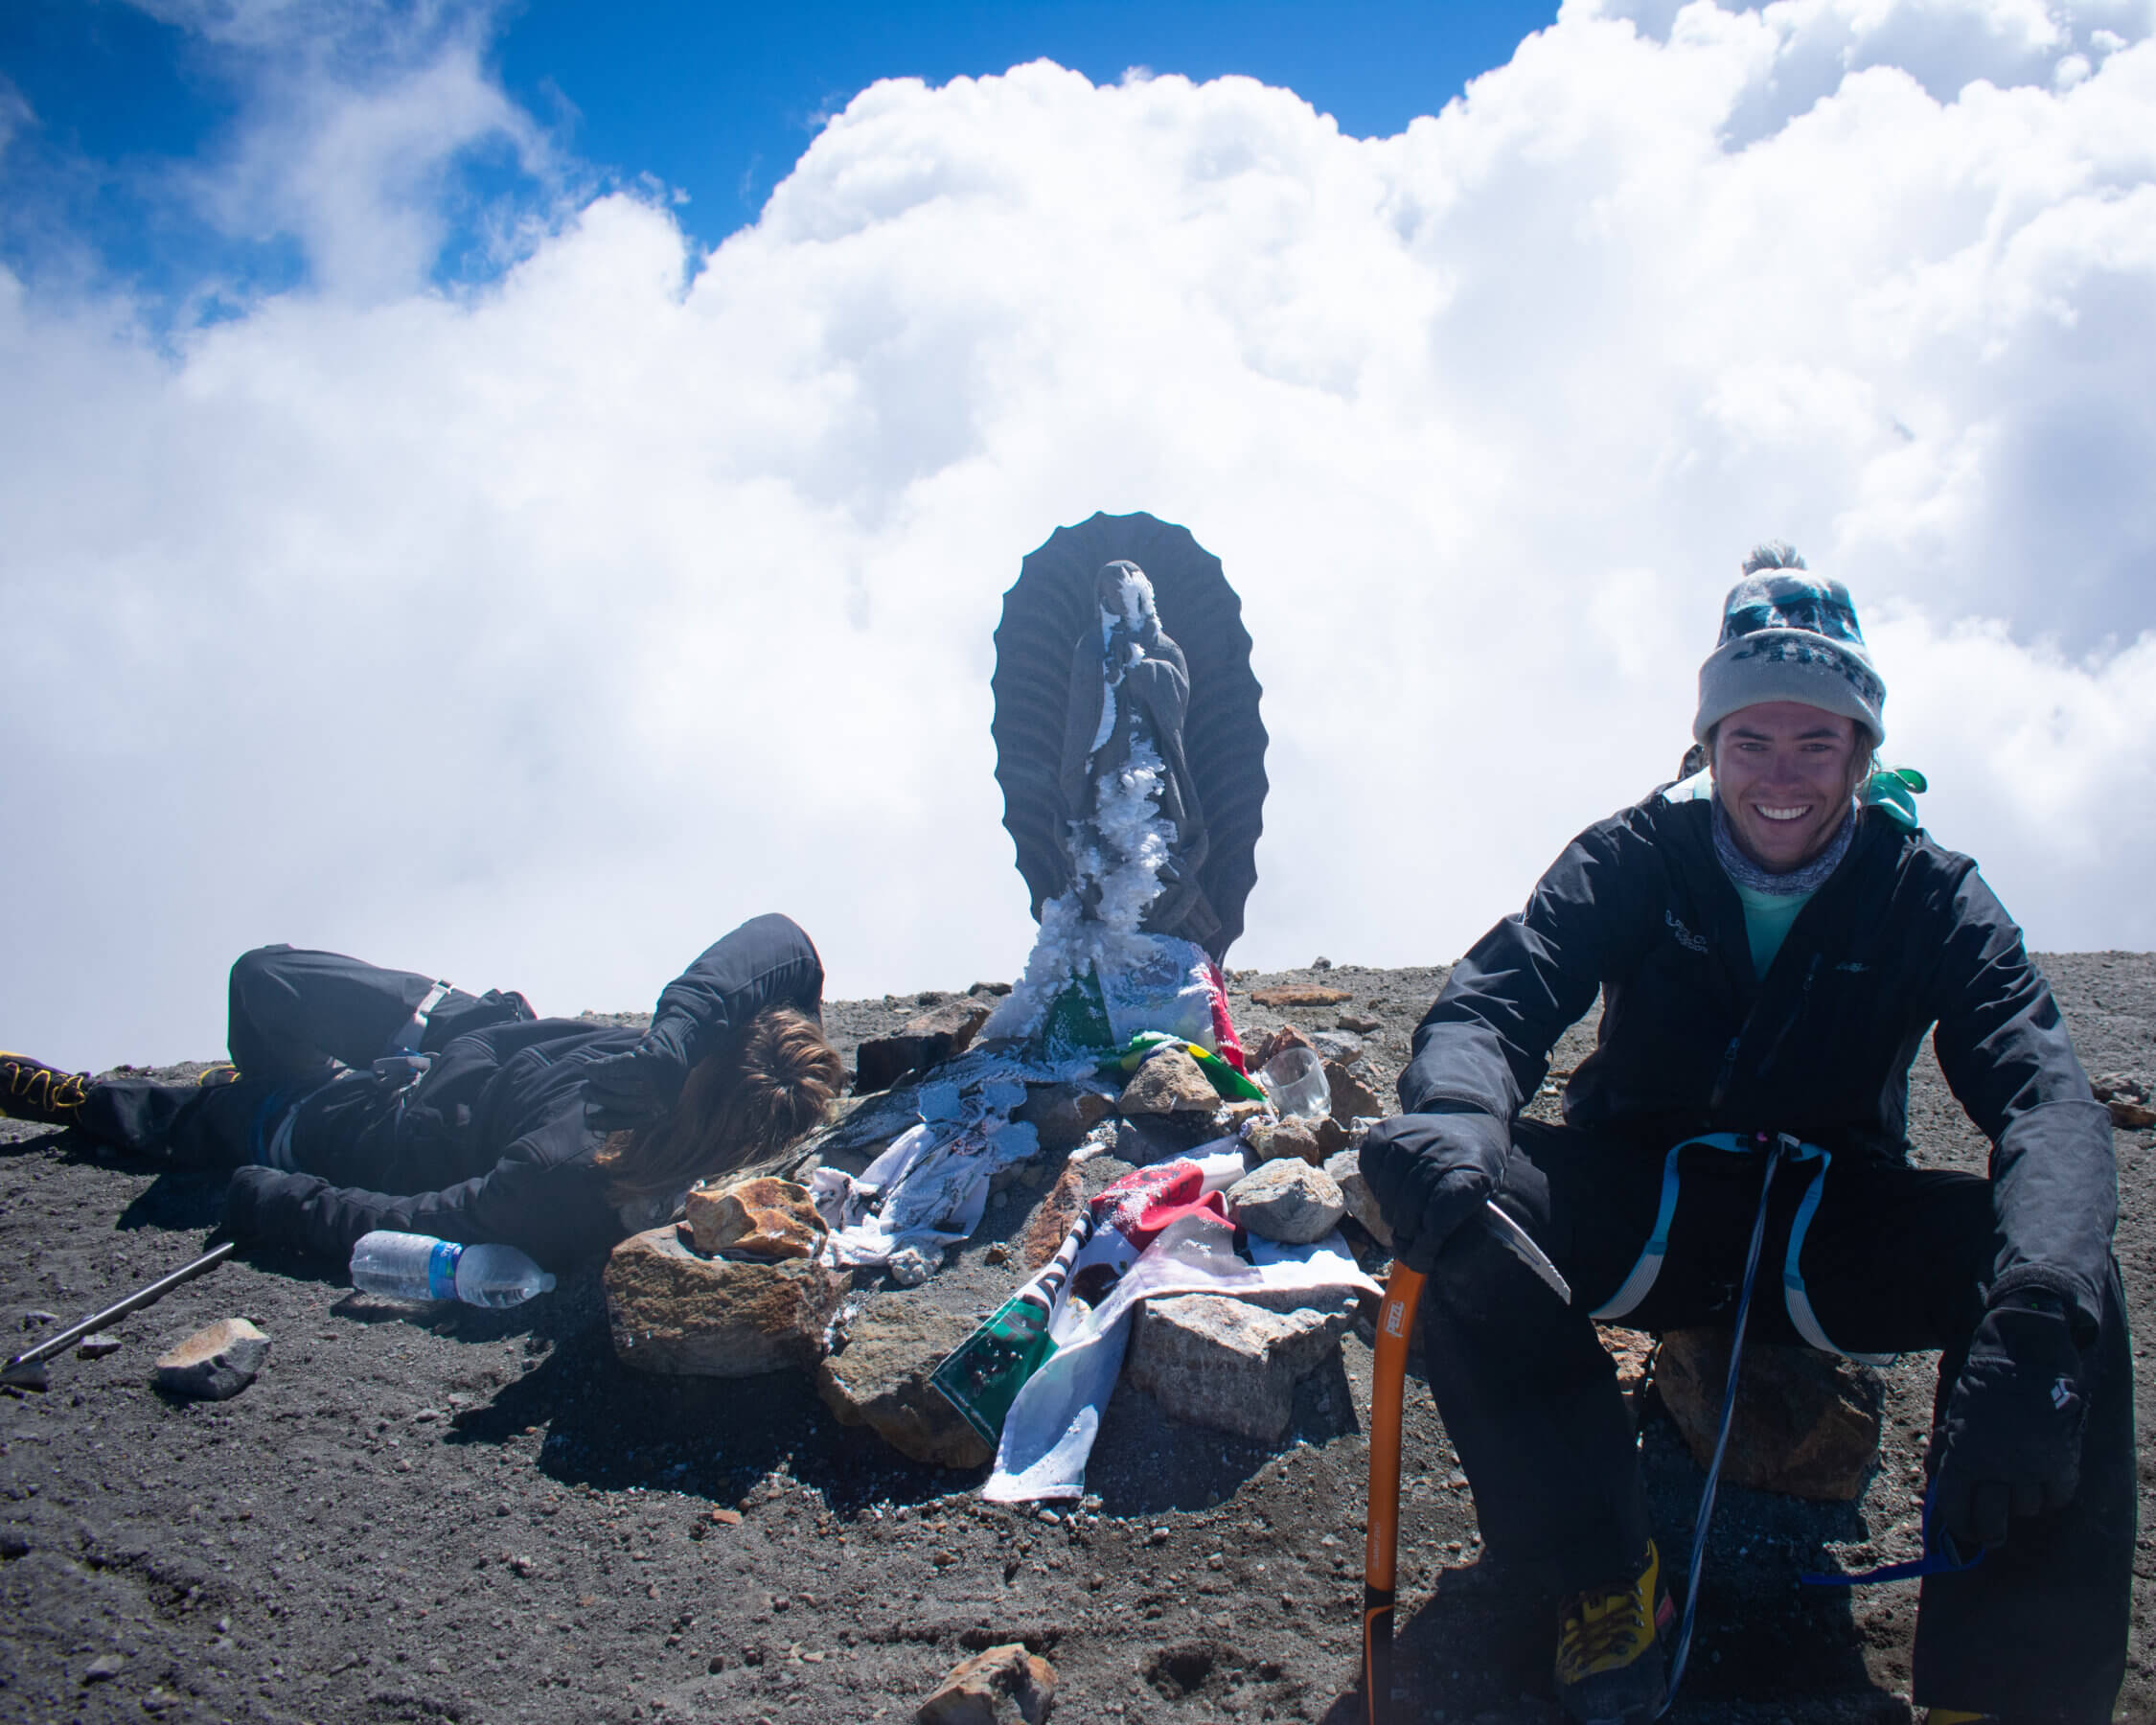 two climbers sit in front of puffy white clouds on the rocky gray summit of pico de orizaba with a small statue of the Virgin Mary wrapped in flags between them. 